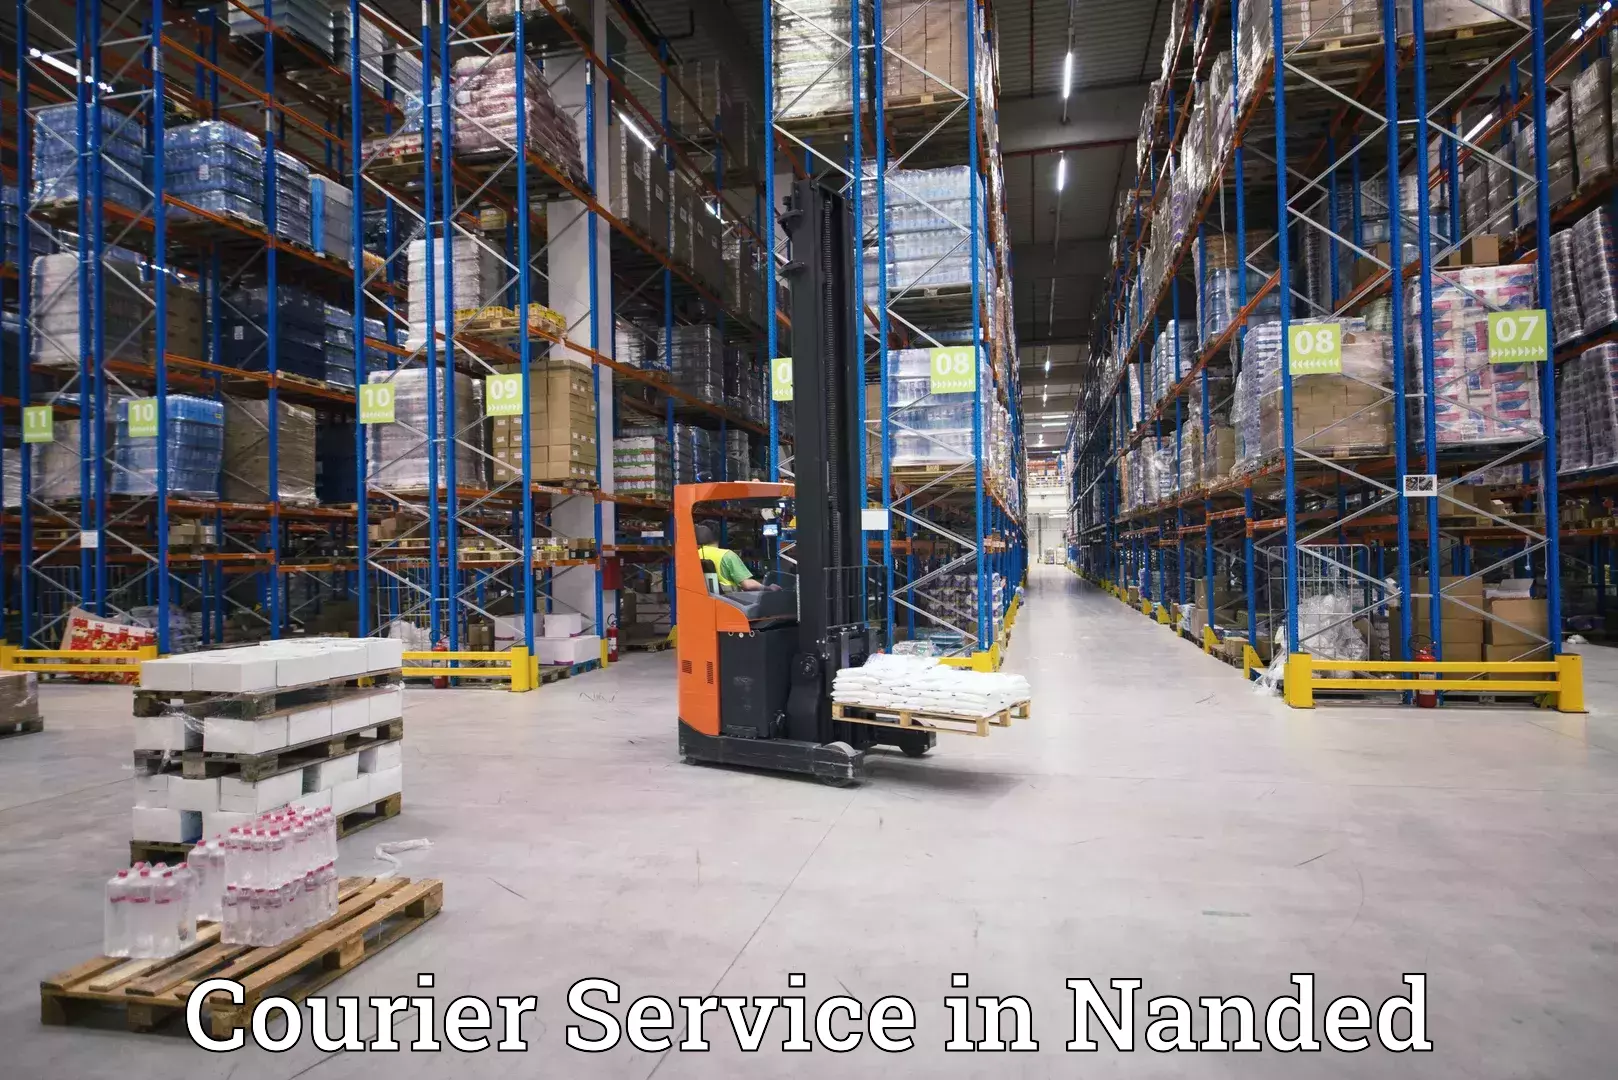 Courier service partnerships in Nanded